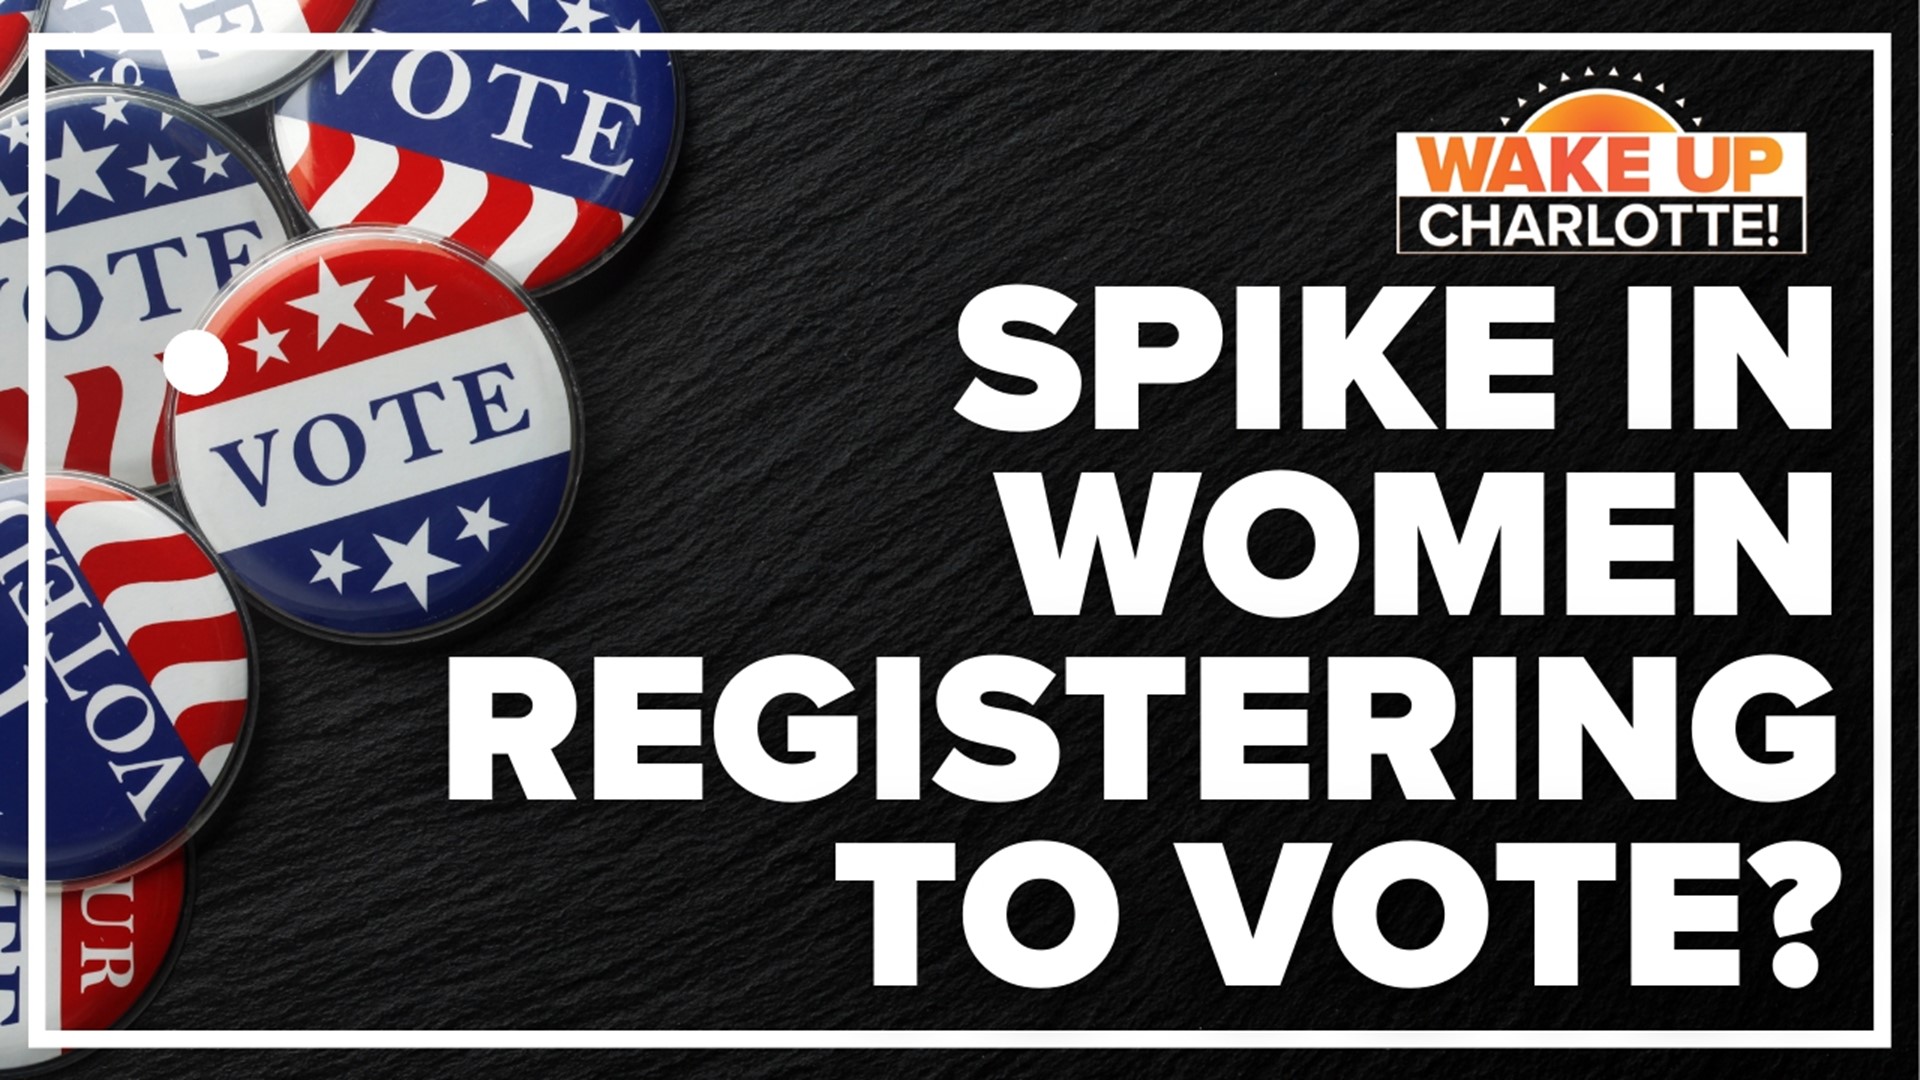 Some states are seeing a big boost in women registering to vote, but is North Carolina one of them?